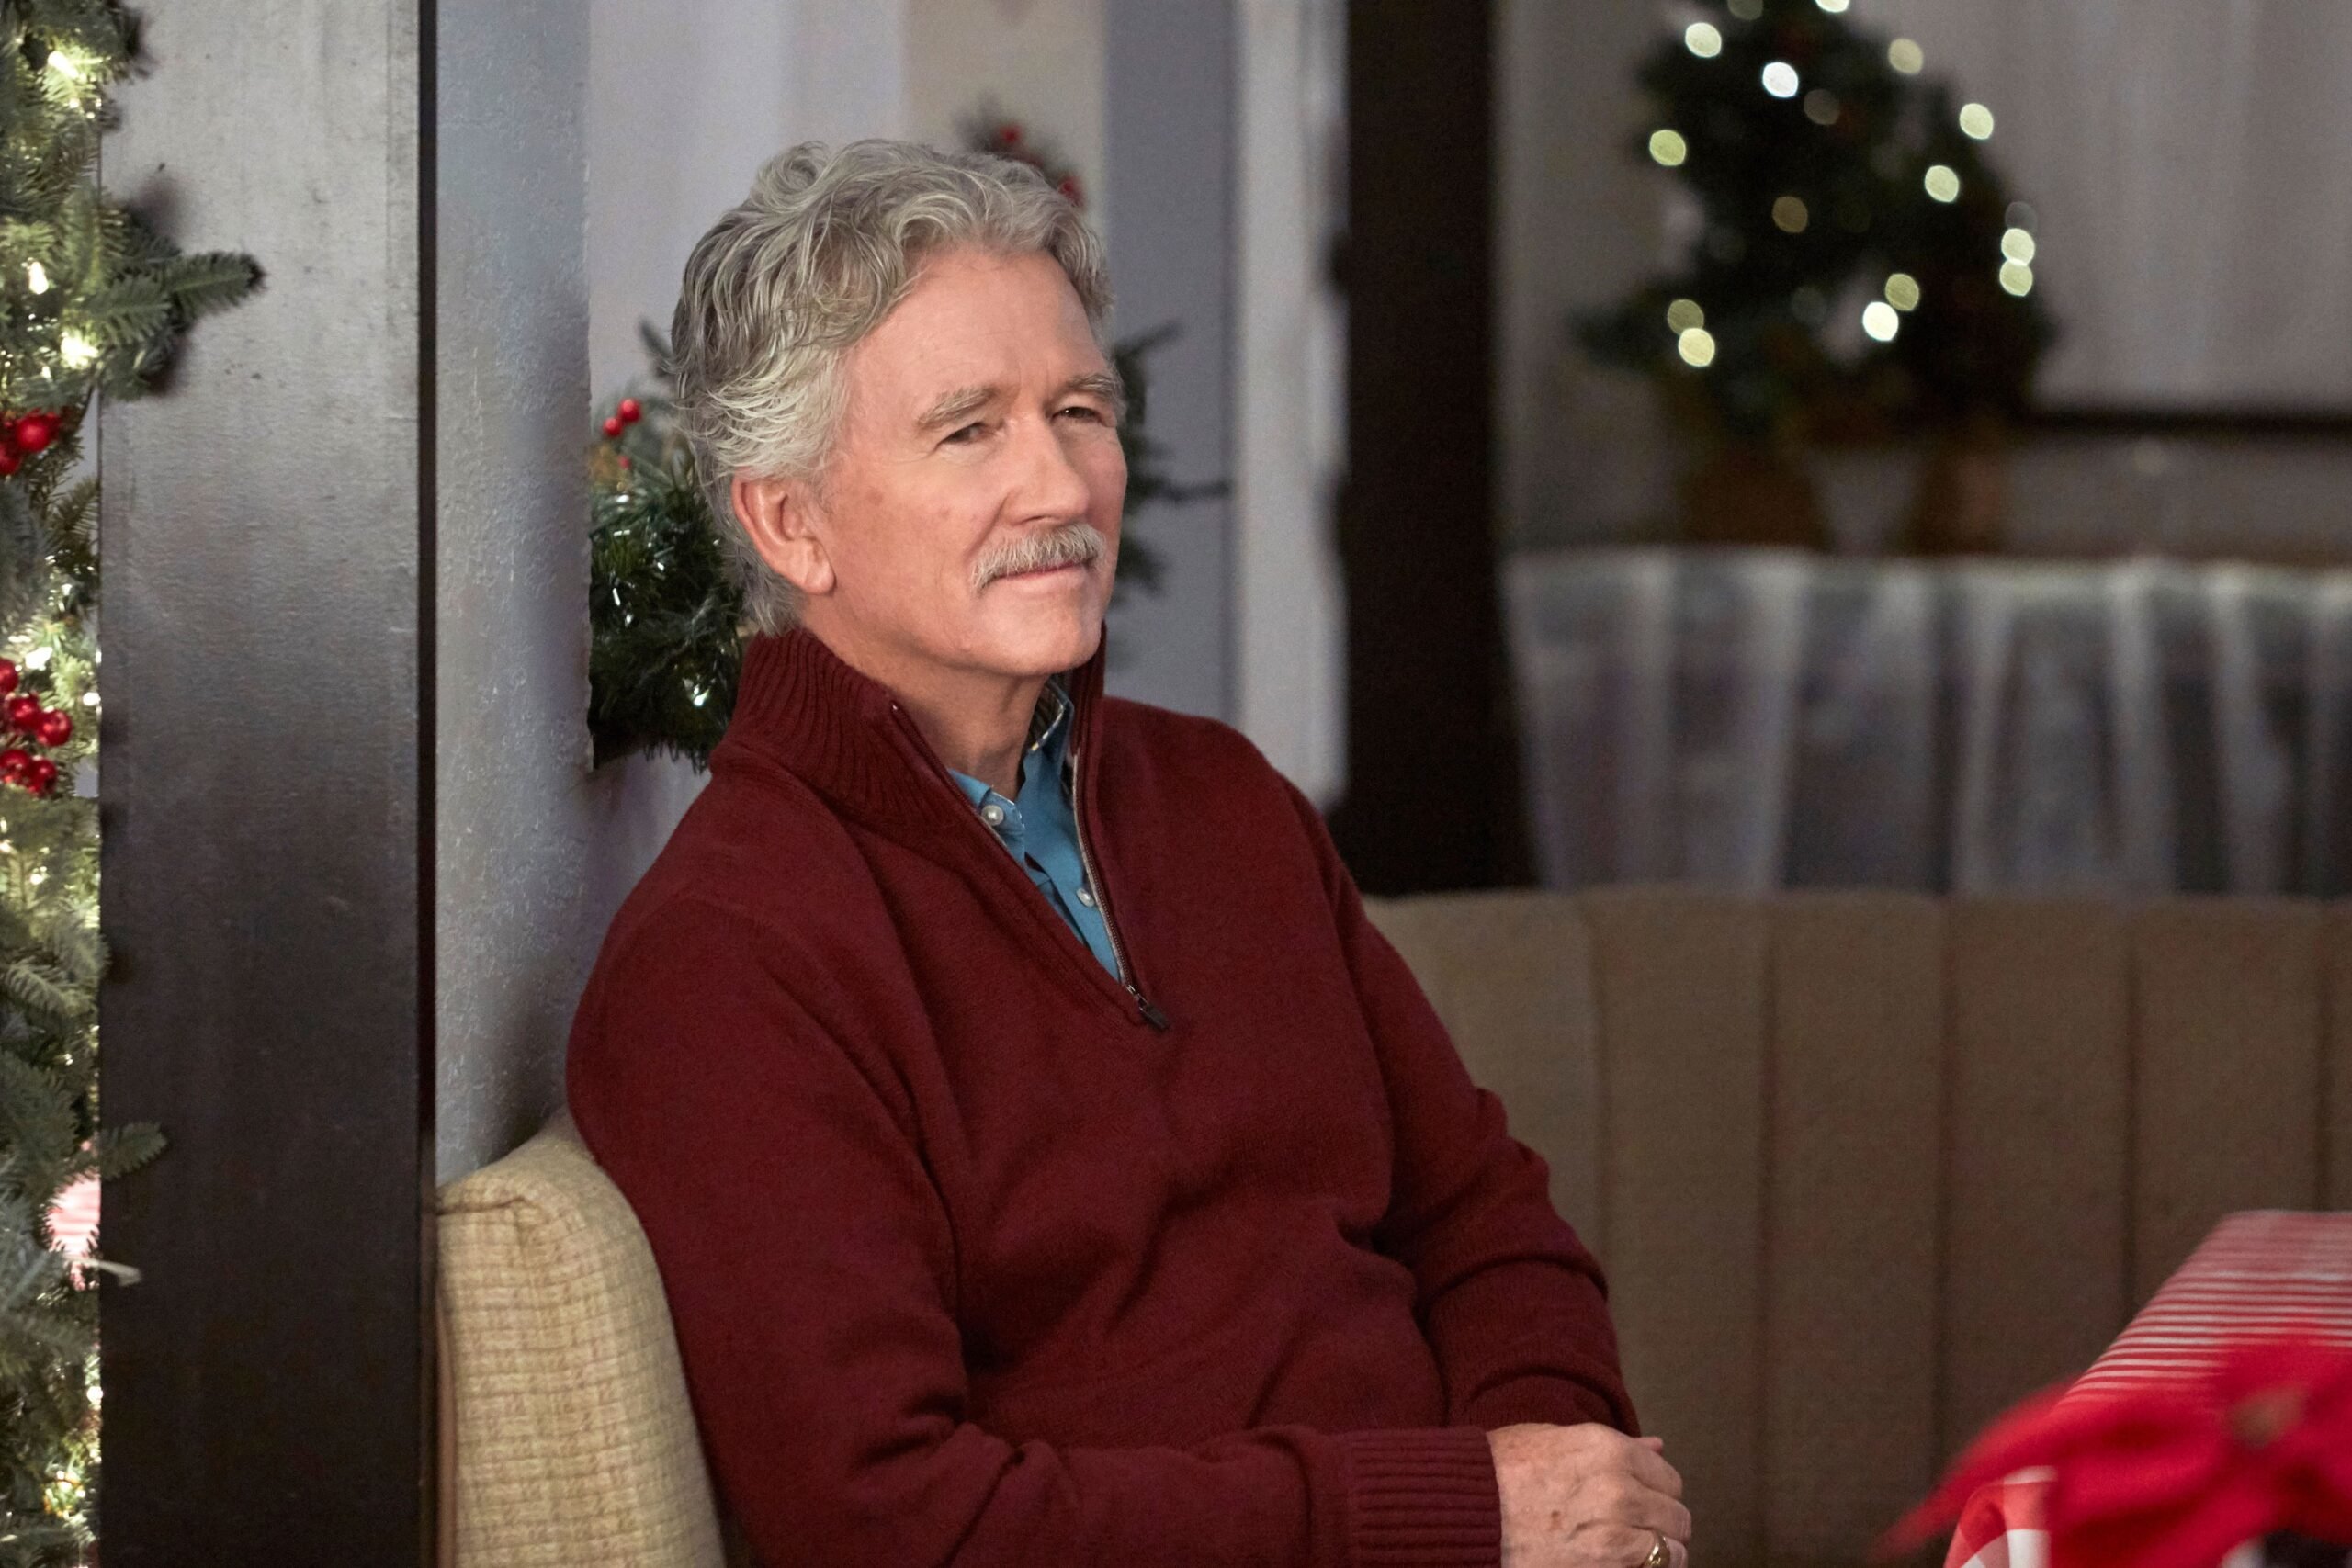 Patrick Duffy Of 'Dallas' Confirms He's Dating This 'Happy Days' Actress Linda Purl